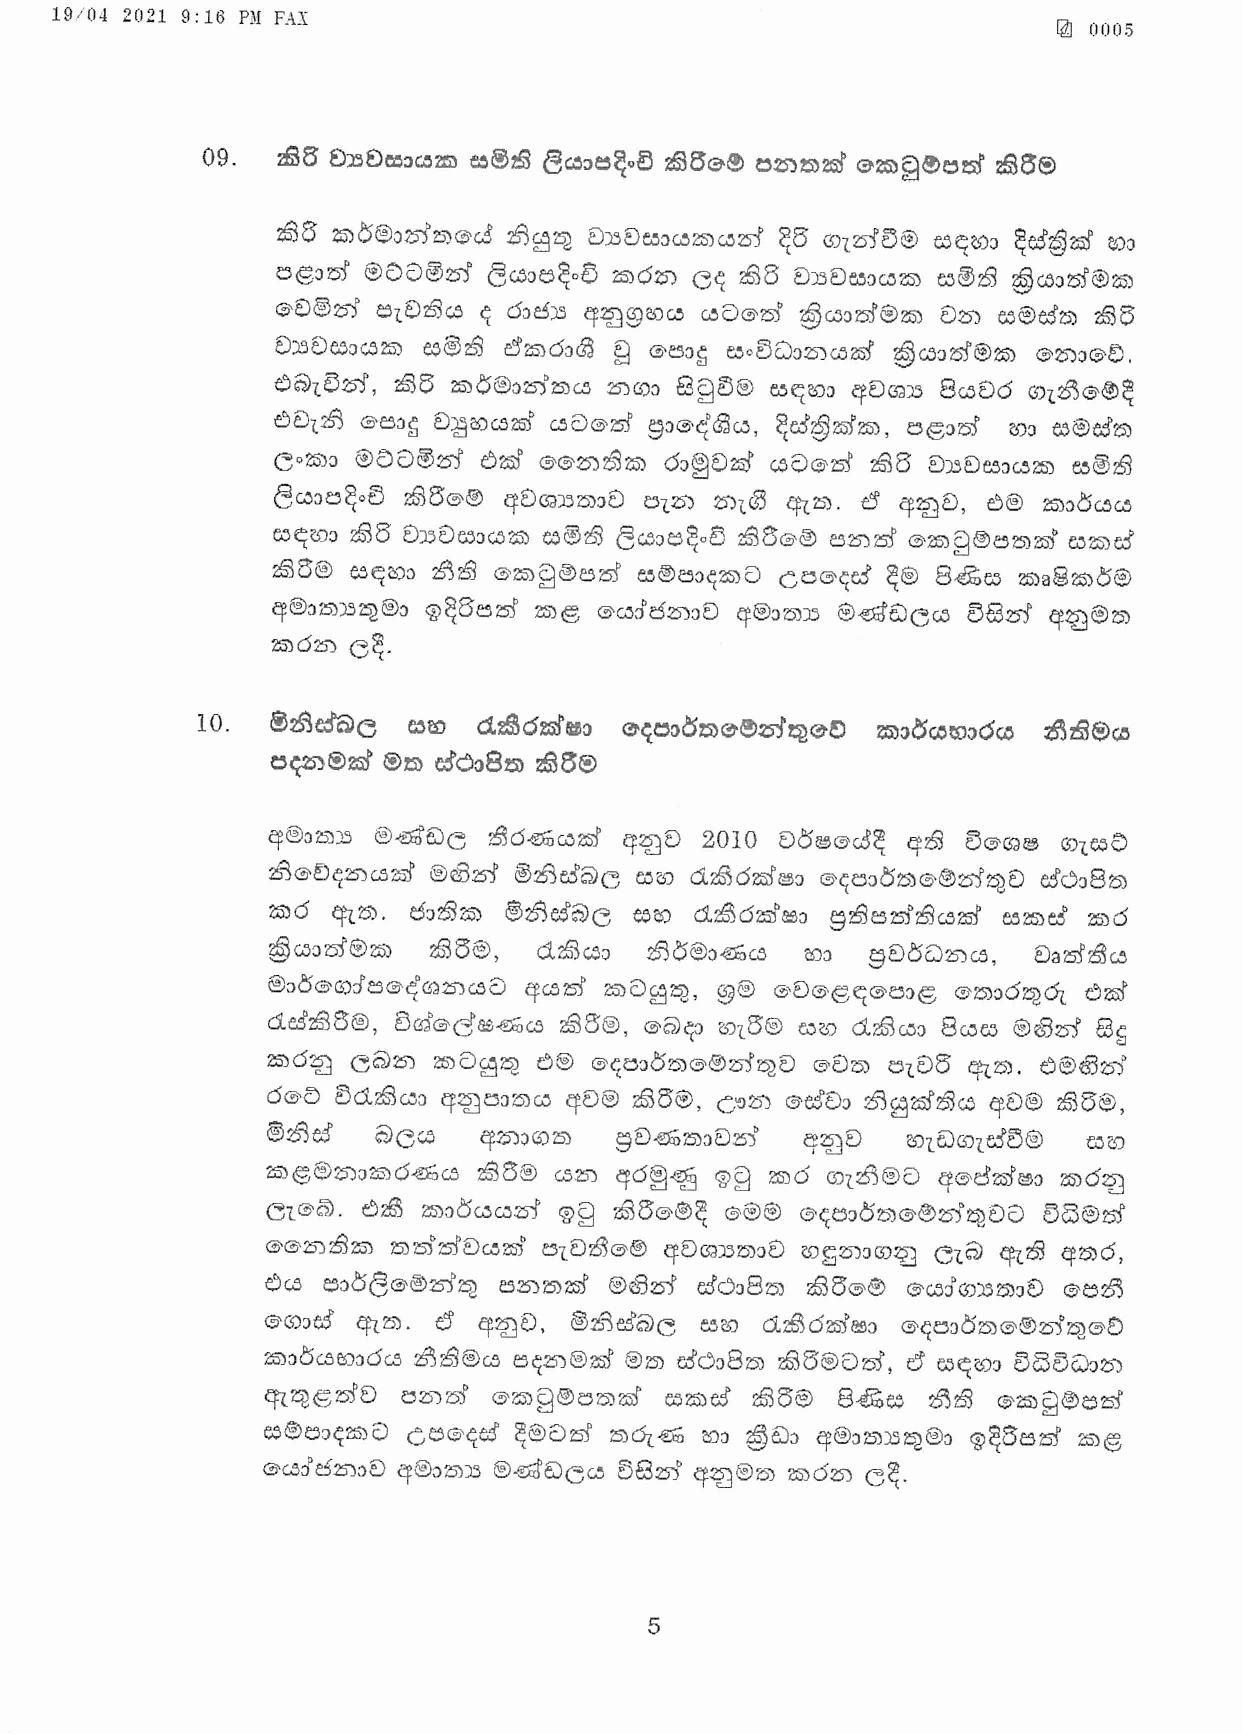 Cabinet Decision on 19.04.2021 page 005